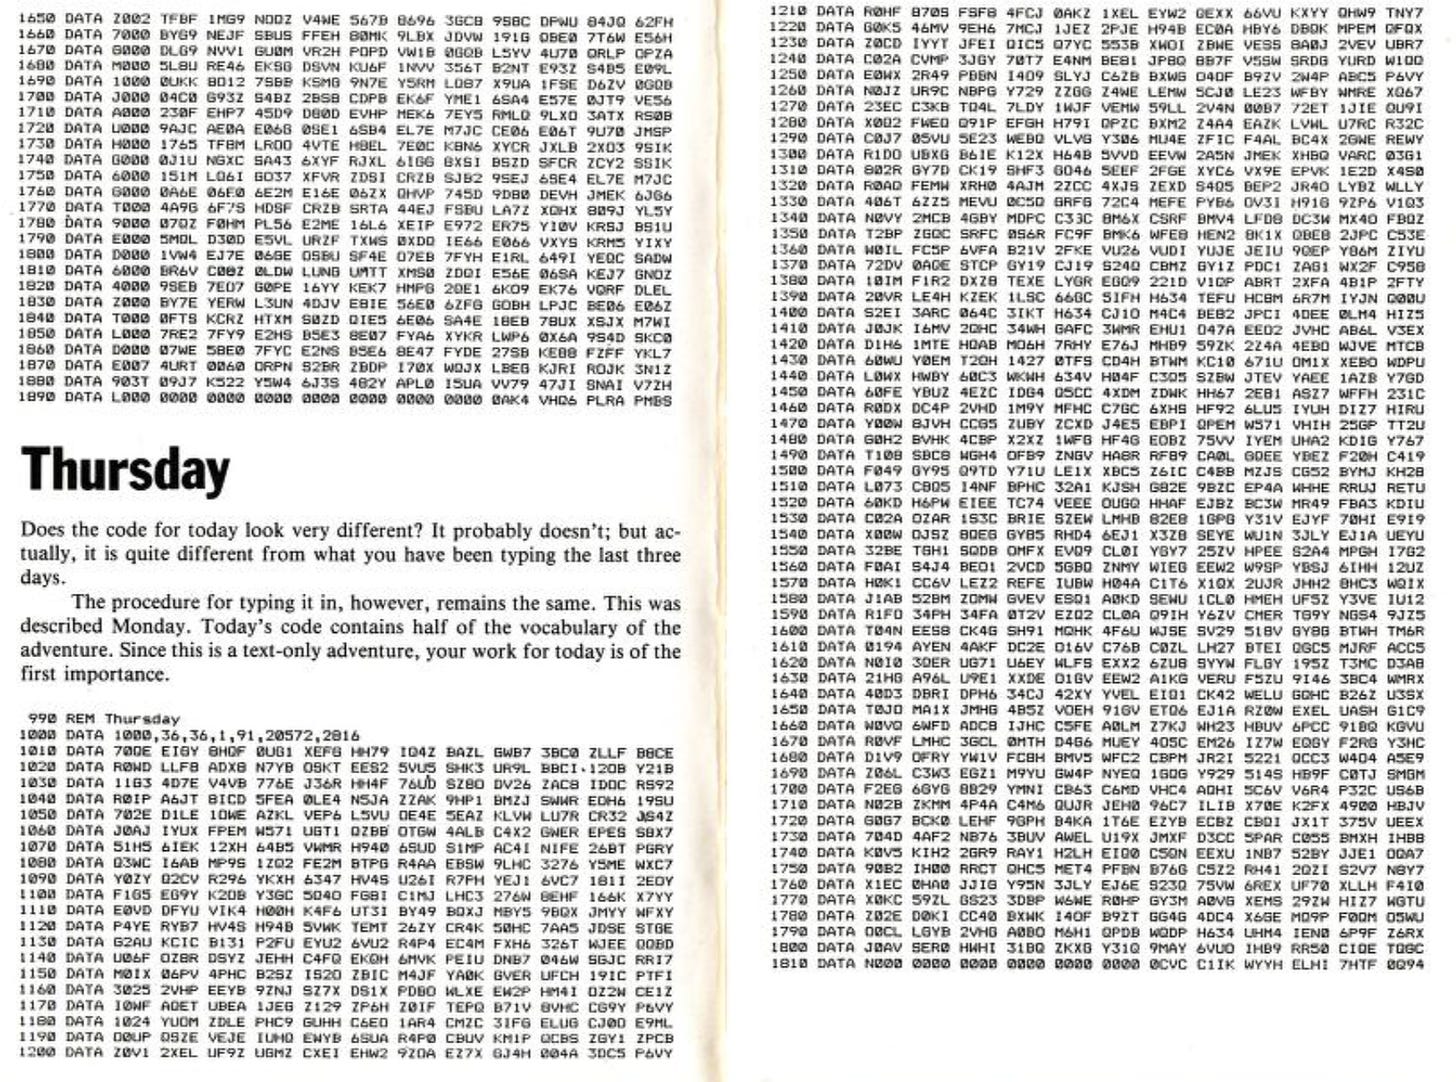 Scan from the book of "The Antagonists" showing dense coded data meant to by typed in by the reader. A header "Thursday" is followed by text beginning "Does the code for today look very different? It probably doesn't; but actually, it is quite different from what you have been typing the last three days."